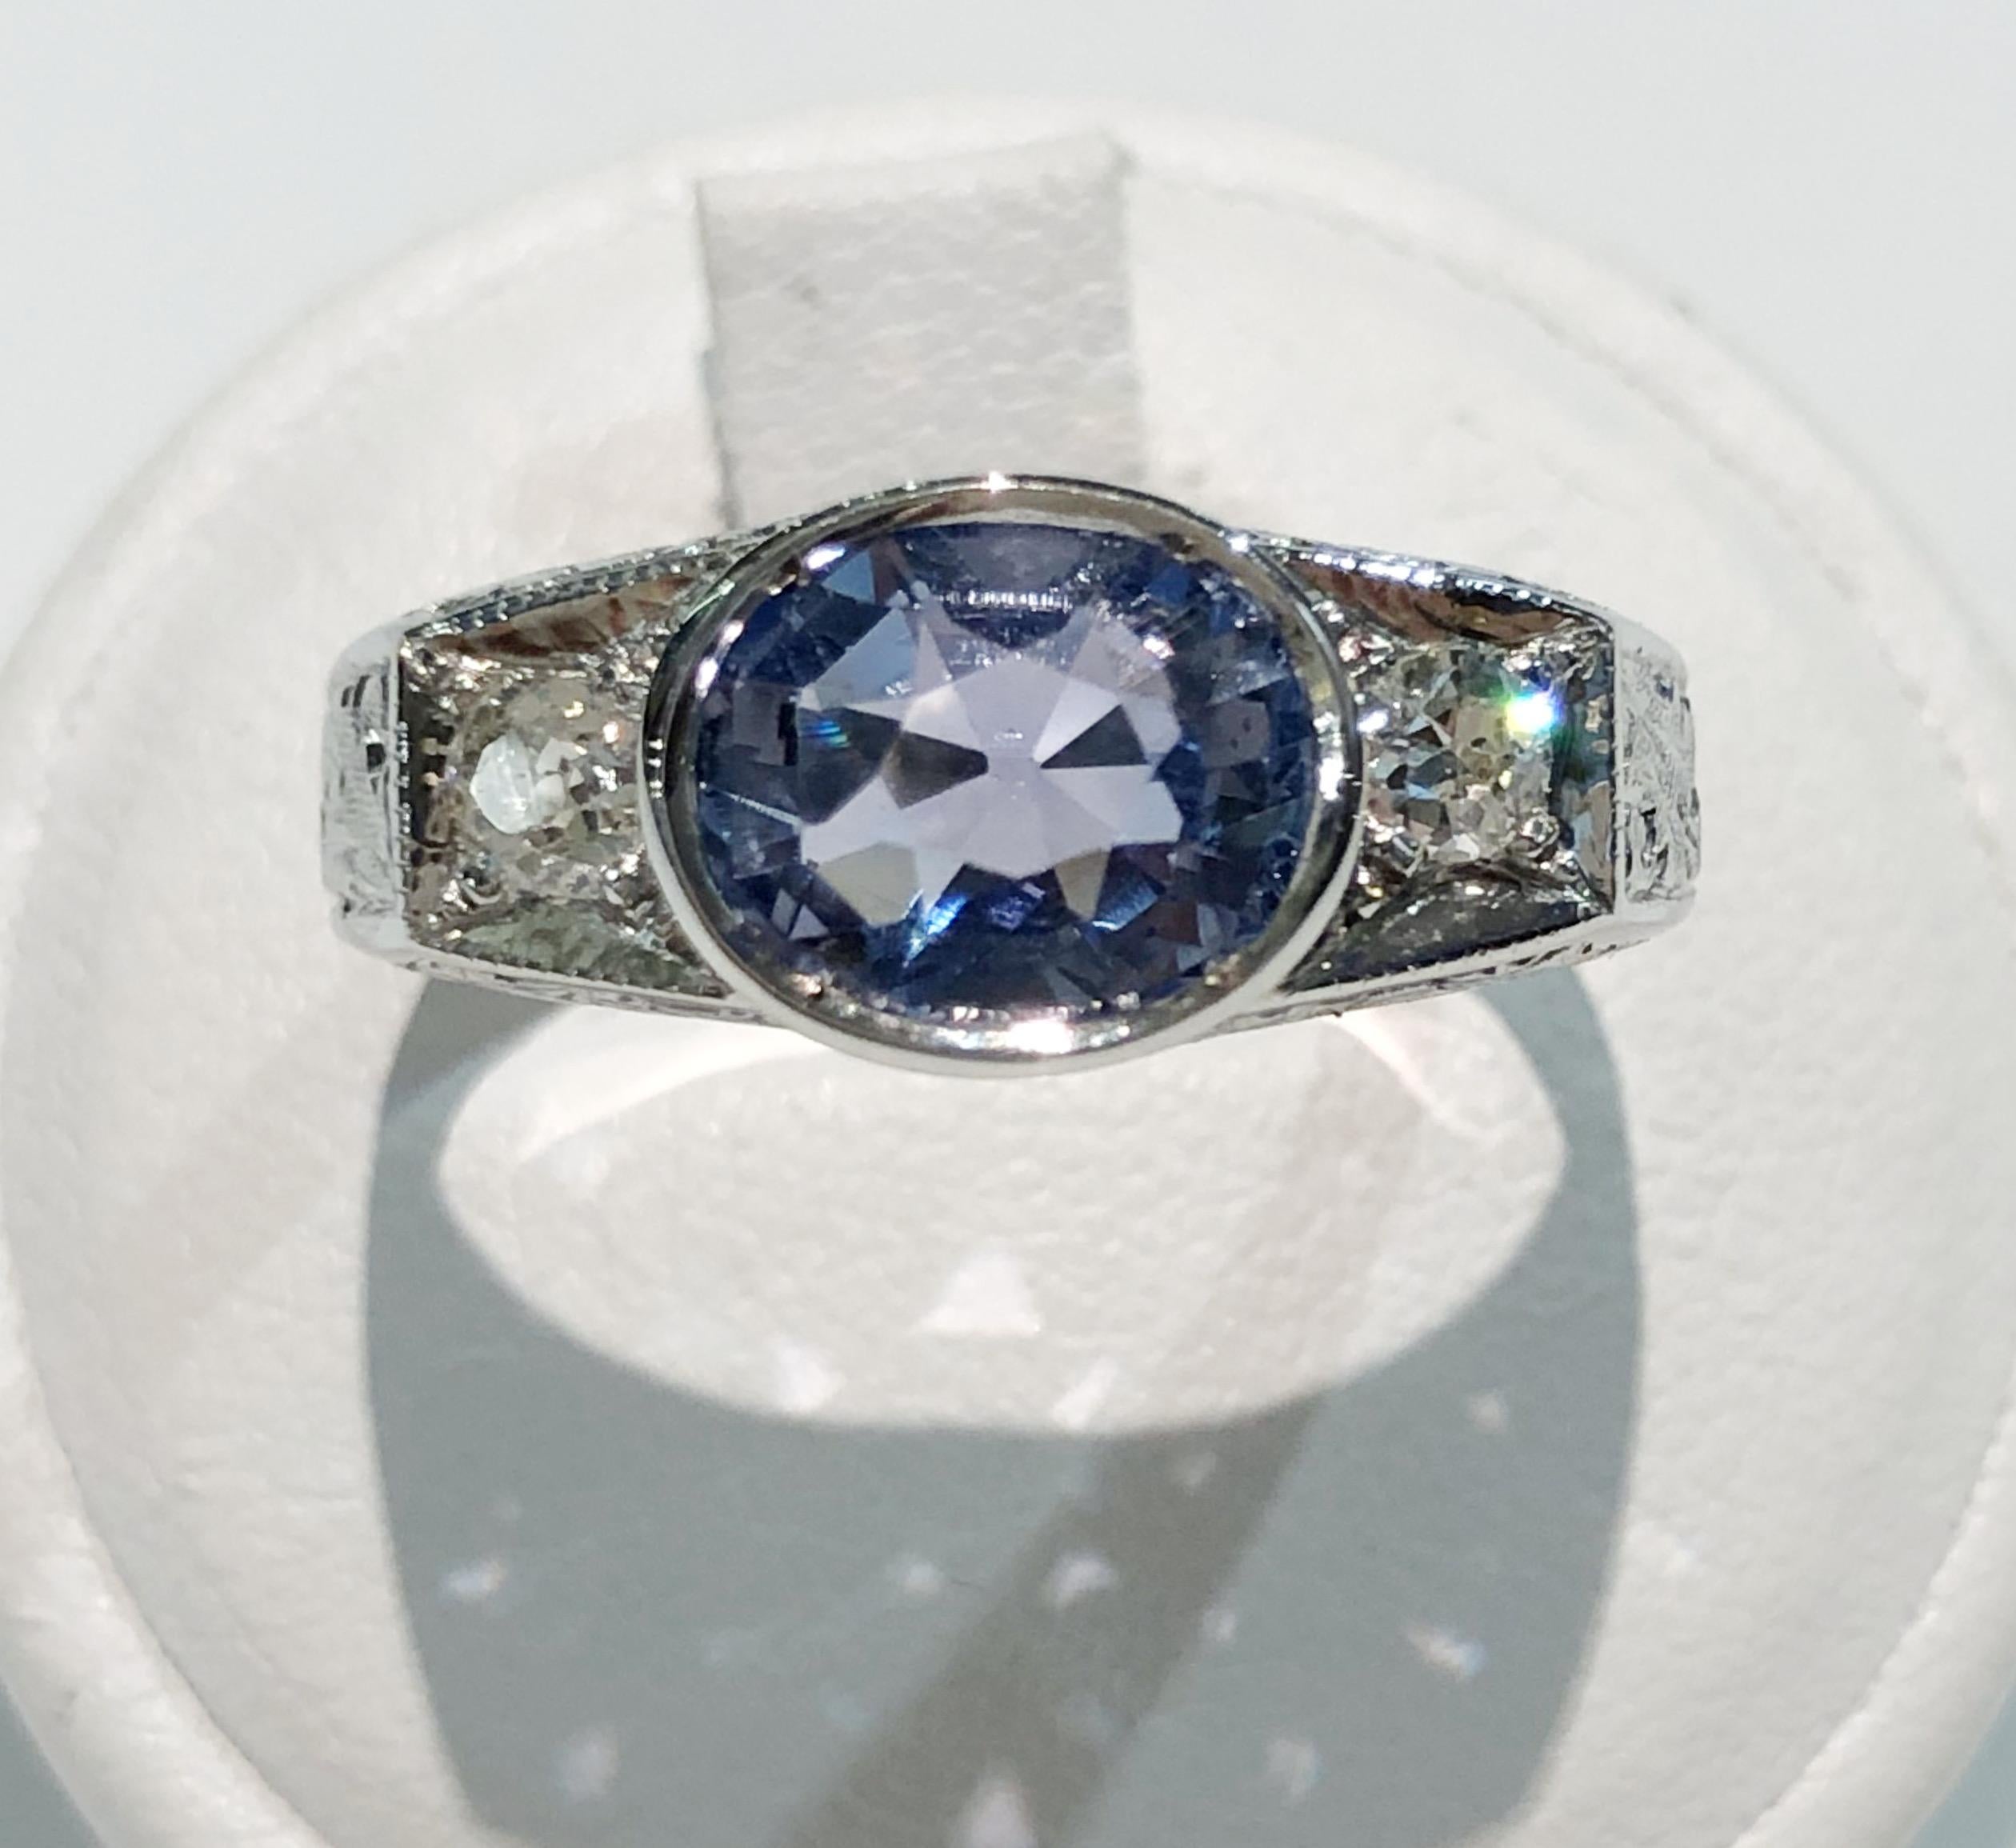 Vintage ring with 18 karat white gold band, one center Ceylon sapphire of 2.1 karats, and brilliant diamonds for a total of 0.35 karats, Italy 1930s
Ring size US 8